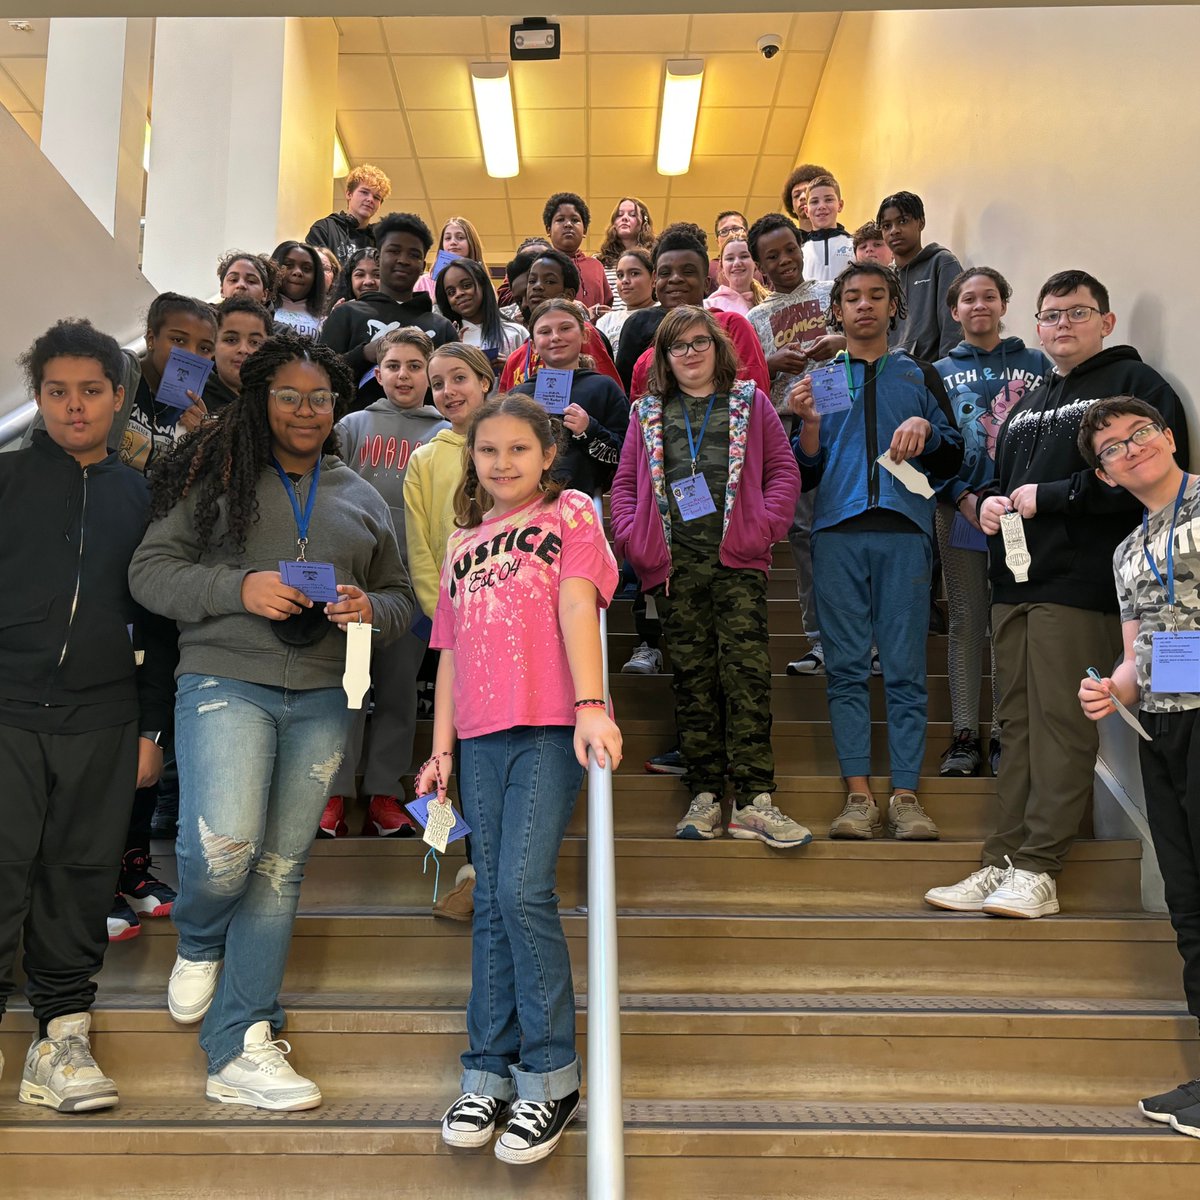 Congratulations to our TMS students of the month for February! These students demonstrate positive behaviors (being on time, being motivated, staying on task), have no disciplinary referrals & are helpful, kind & considerate members of the TMS community. Congratulations to all!